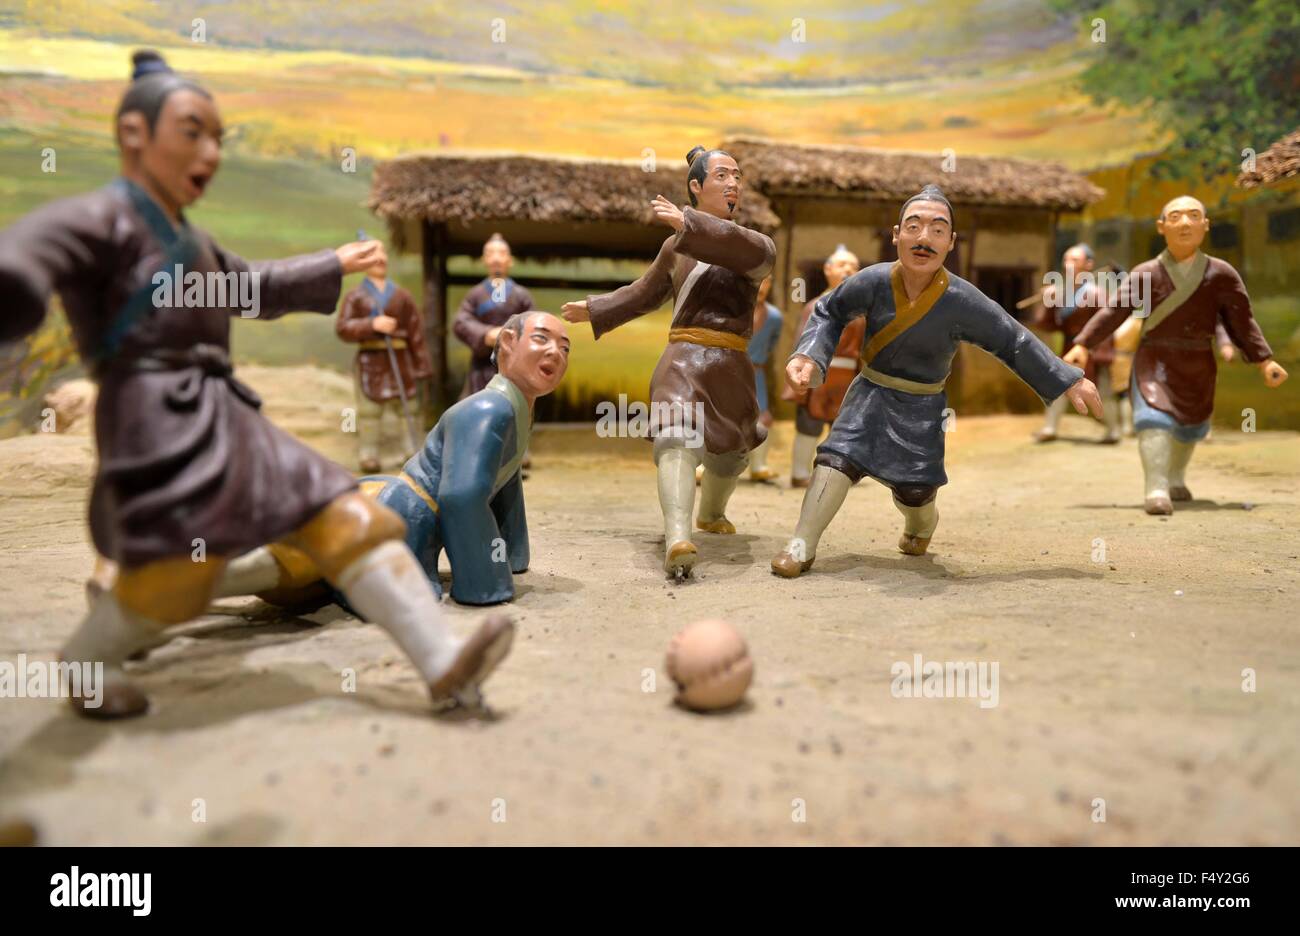 (151024) -- LINZI(SHANDONG), Oct. 24, 2015 (Xinhua) -- Photo taken on Oct. 23, 2015 shows the model reproducing the scene of ancient China's football game at Linzi Football Museum in east China's Shandong Province. China's Linzi Football Museum announced a partnership with the National Football Museum in Manchester, England on Friday. The two museums would work together to promote their shared objectives of communicating football culture to a world-wide audience. Linzi district, the birth place of Cuju, has been officially recognized by FIFA in 2004 as the origin of football. (Xinhua/Zhu Zhe Stock Photo